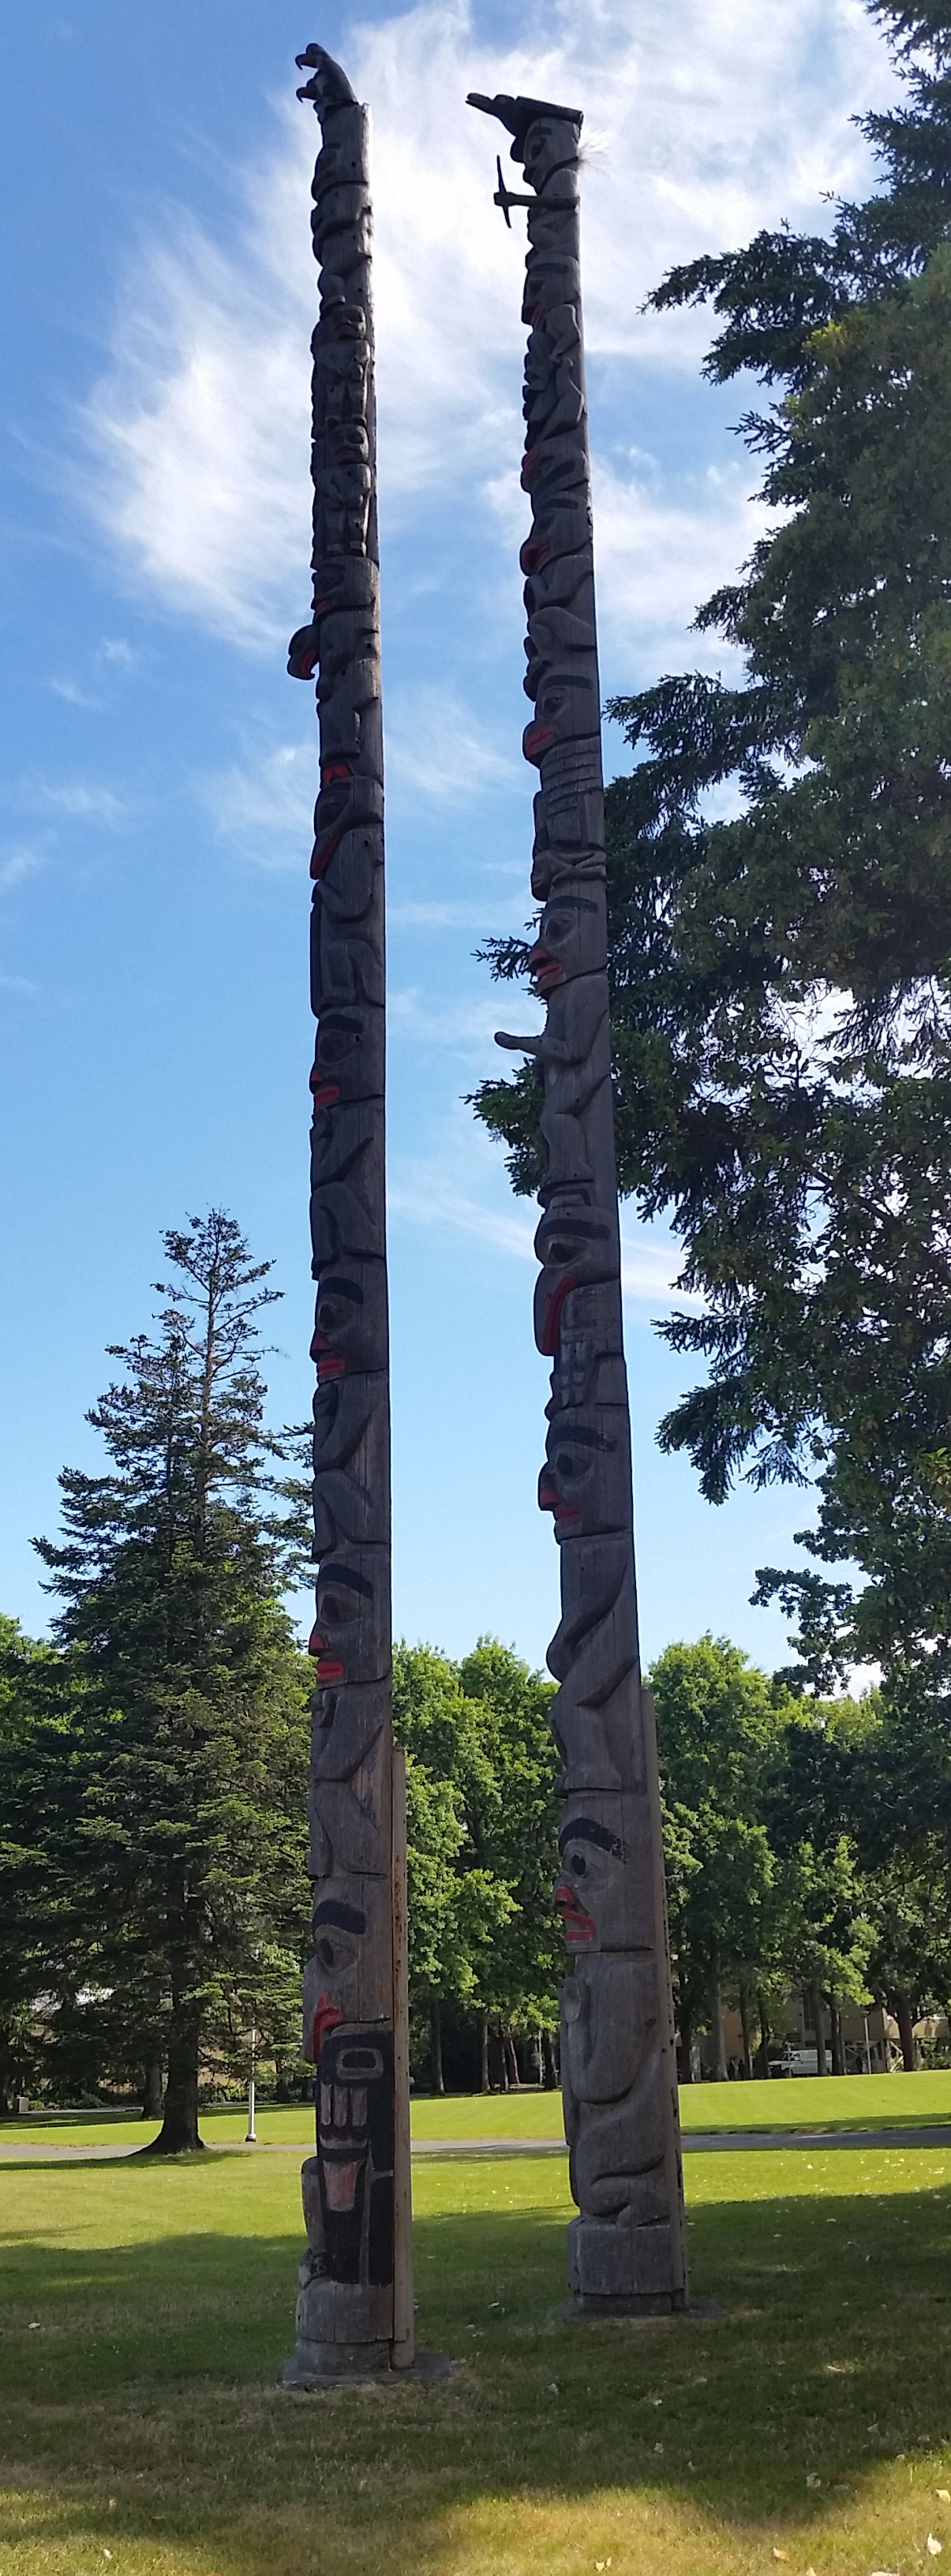 Two Totem Poles UVic main commons